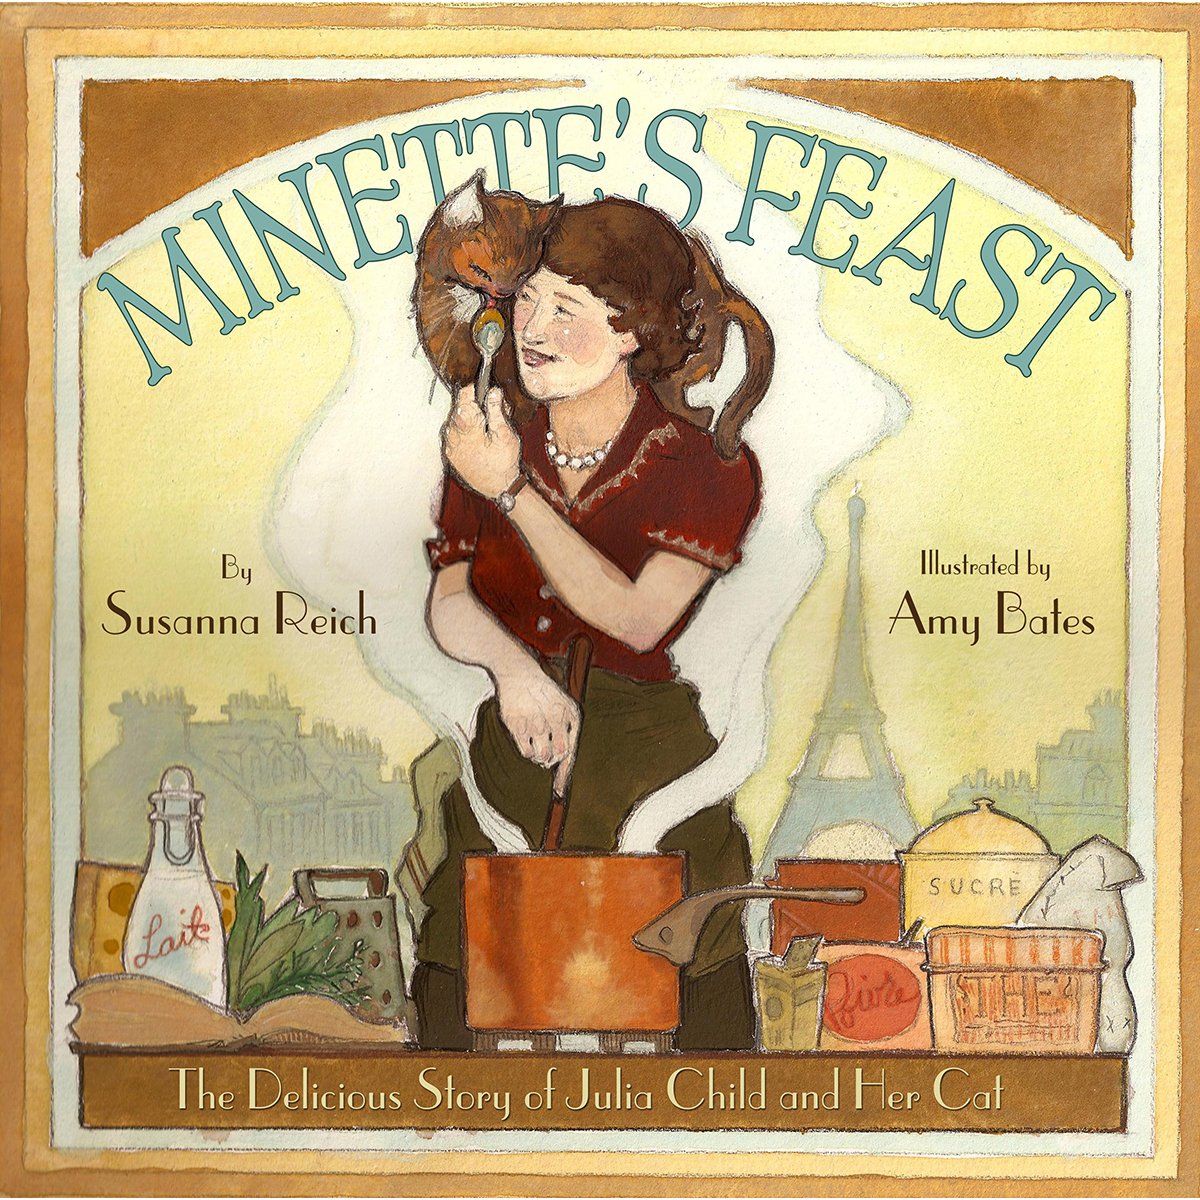 Book cover of Minette's Feast, written by Susanna Reich